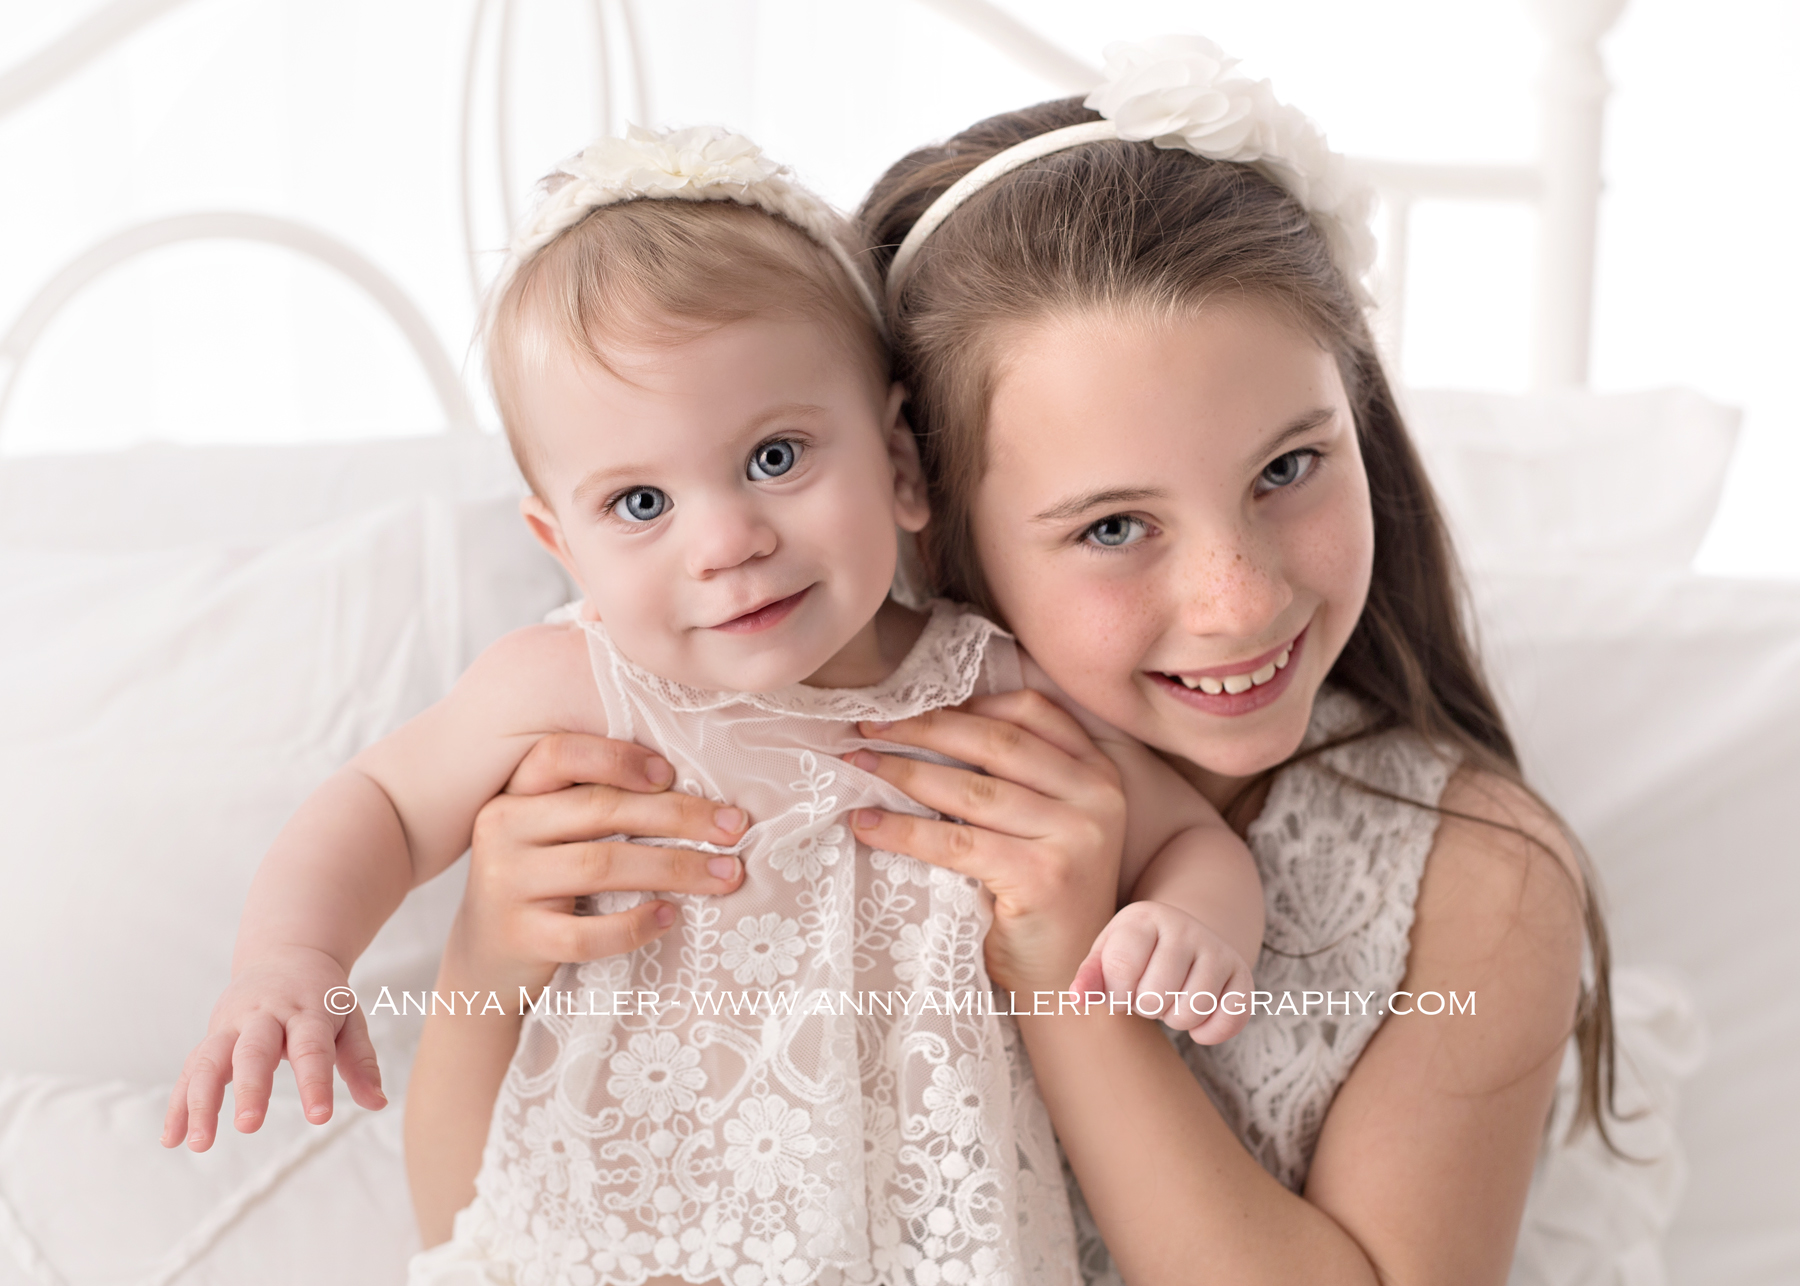 Photograph of baby girl and her big sister on a white bed by Pickering photographer Annya Miller